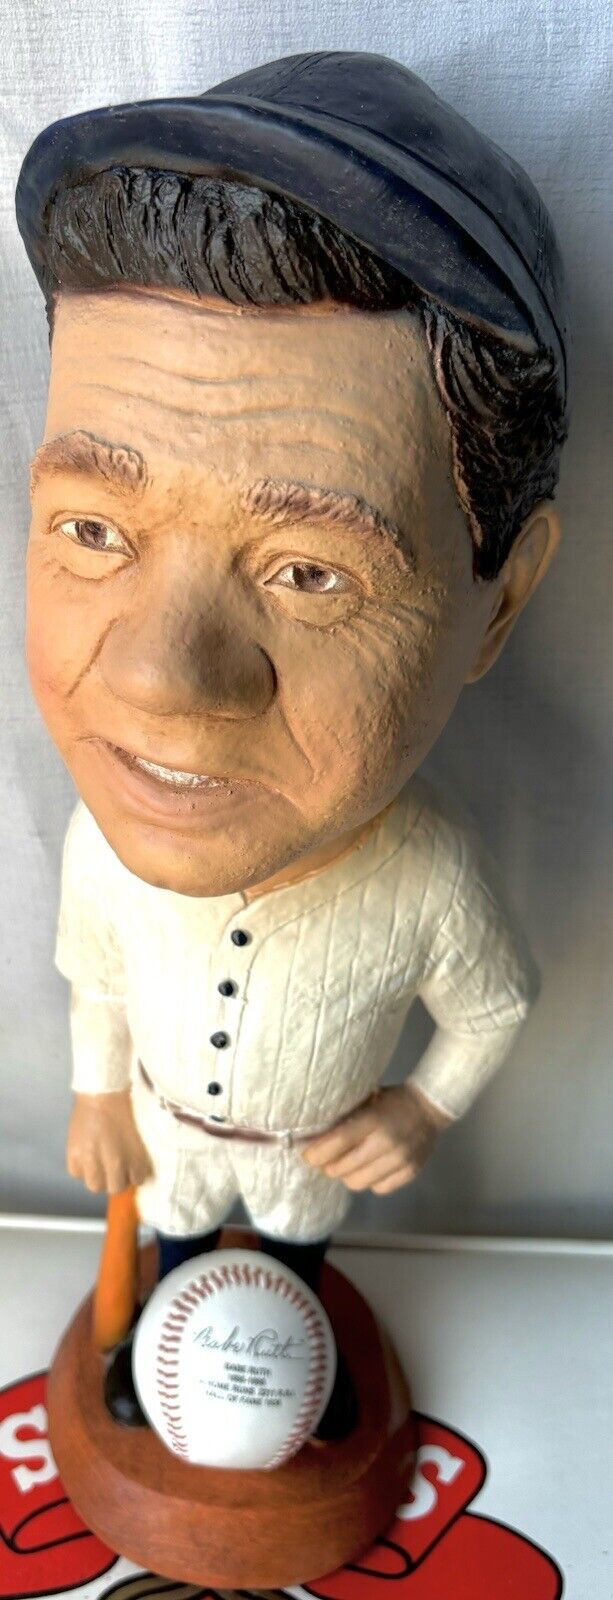 Vintage 1987 Esco Babe Ruth Figurine 18” Statue, Great shape, Awesome find